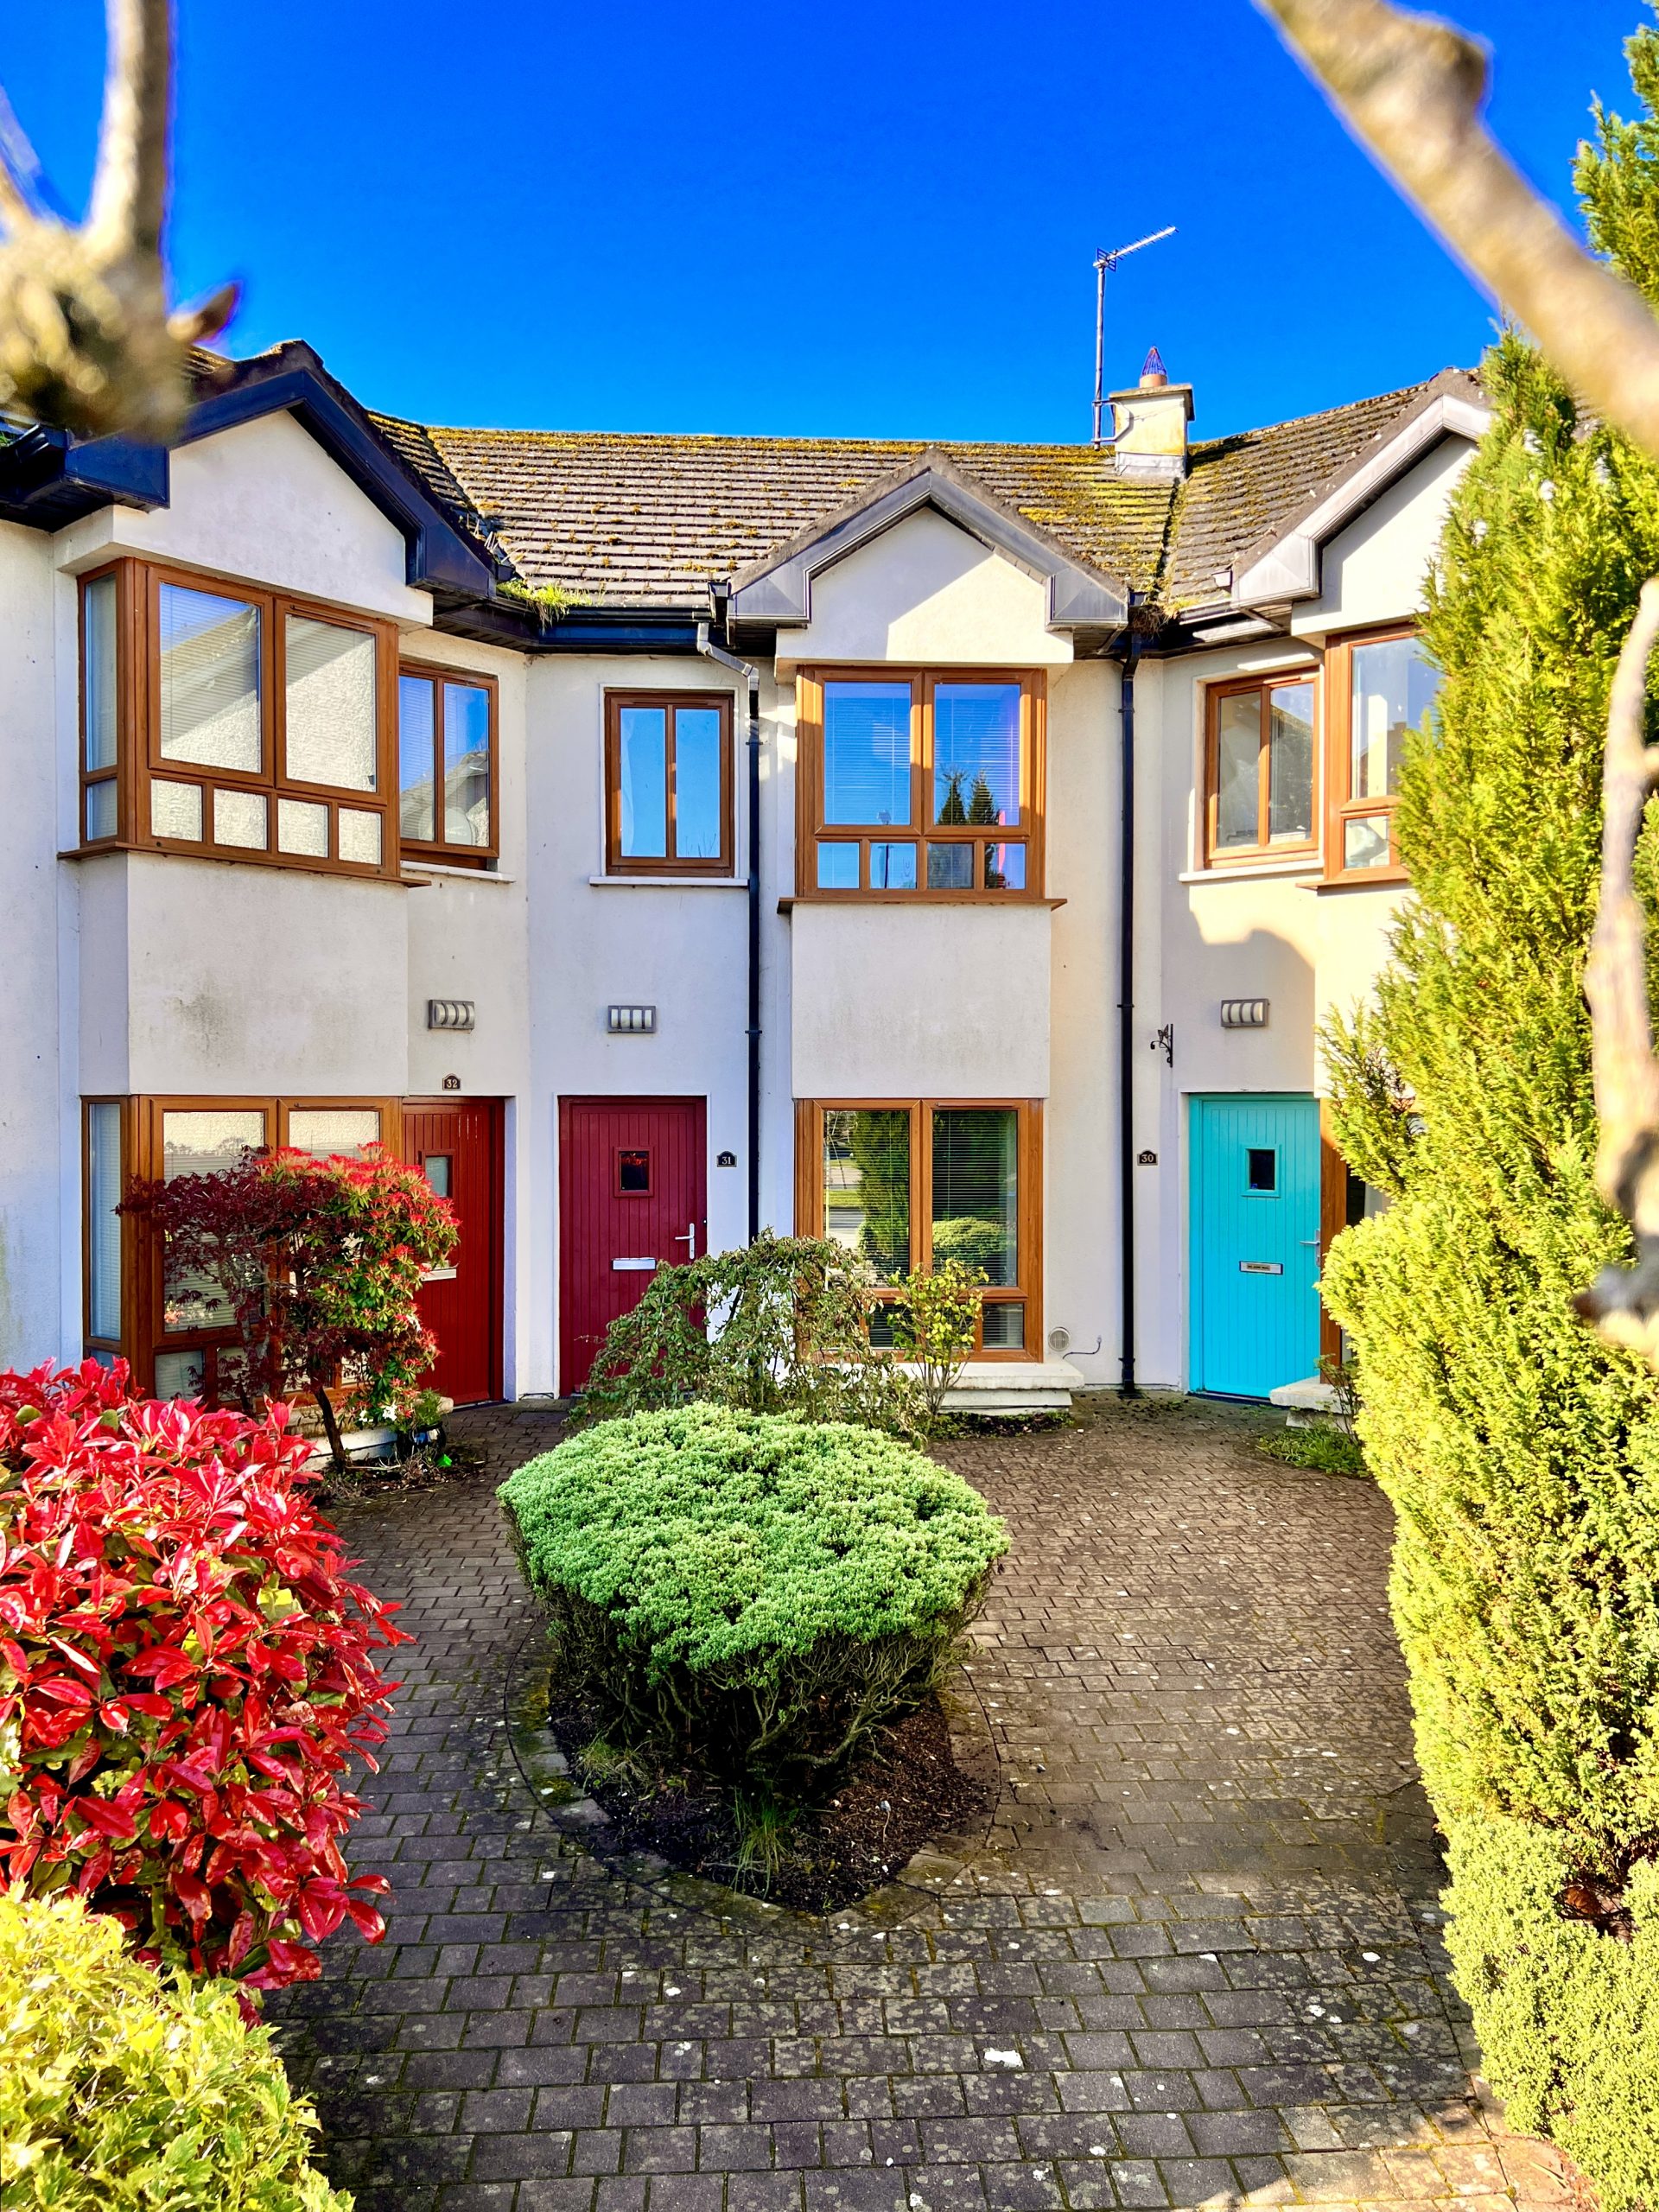 31 The Orchard, Athlone, Co. Westmeath